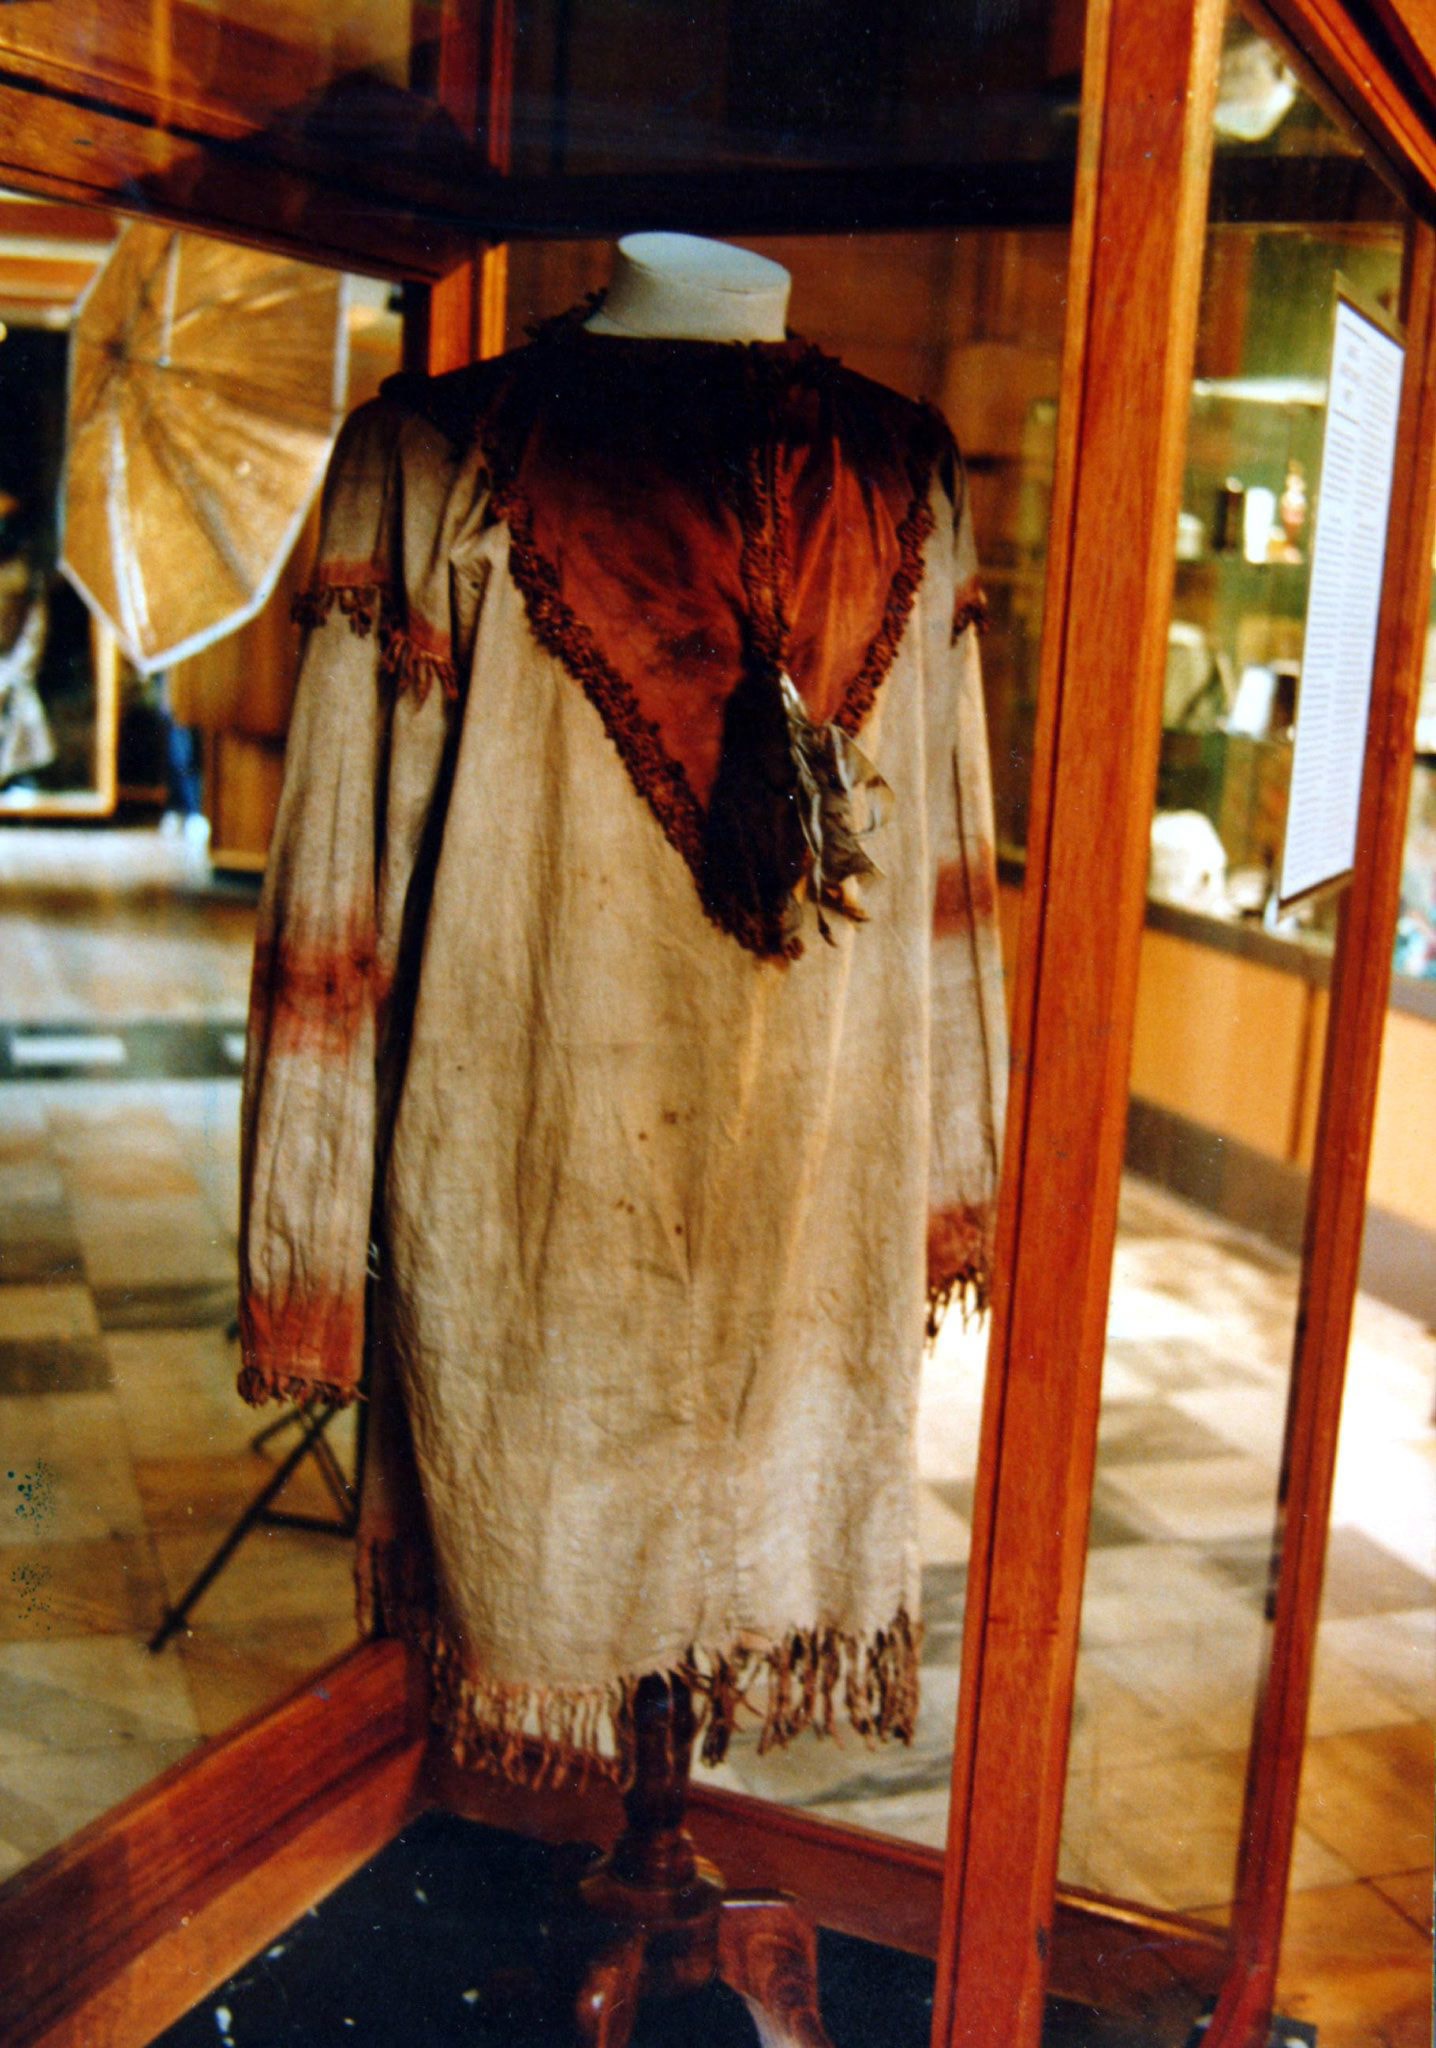 The Indian Ghost Shirt behind glass at Kelvingrove Art Gallery. It returned to the US in 2000.